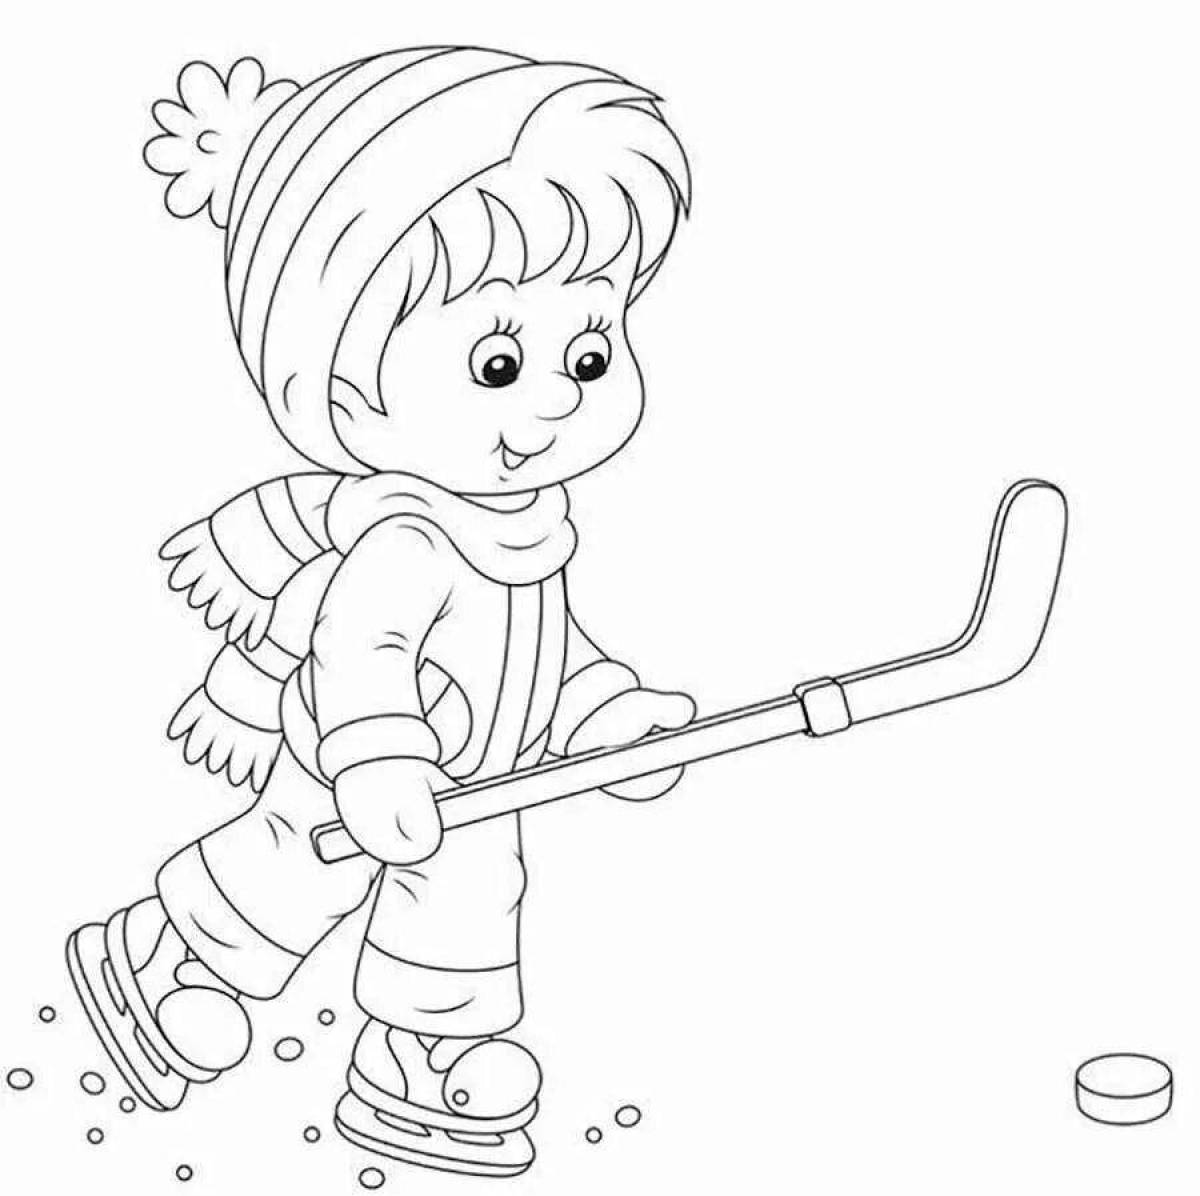 Impressive coloring book winter sports for children 6-7 years old